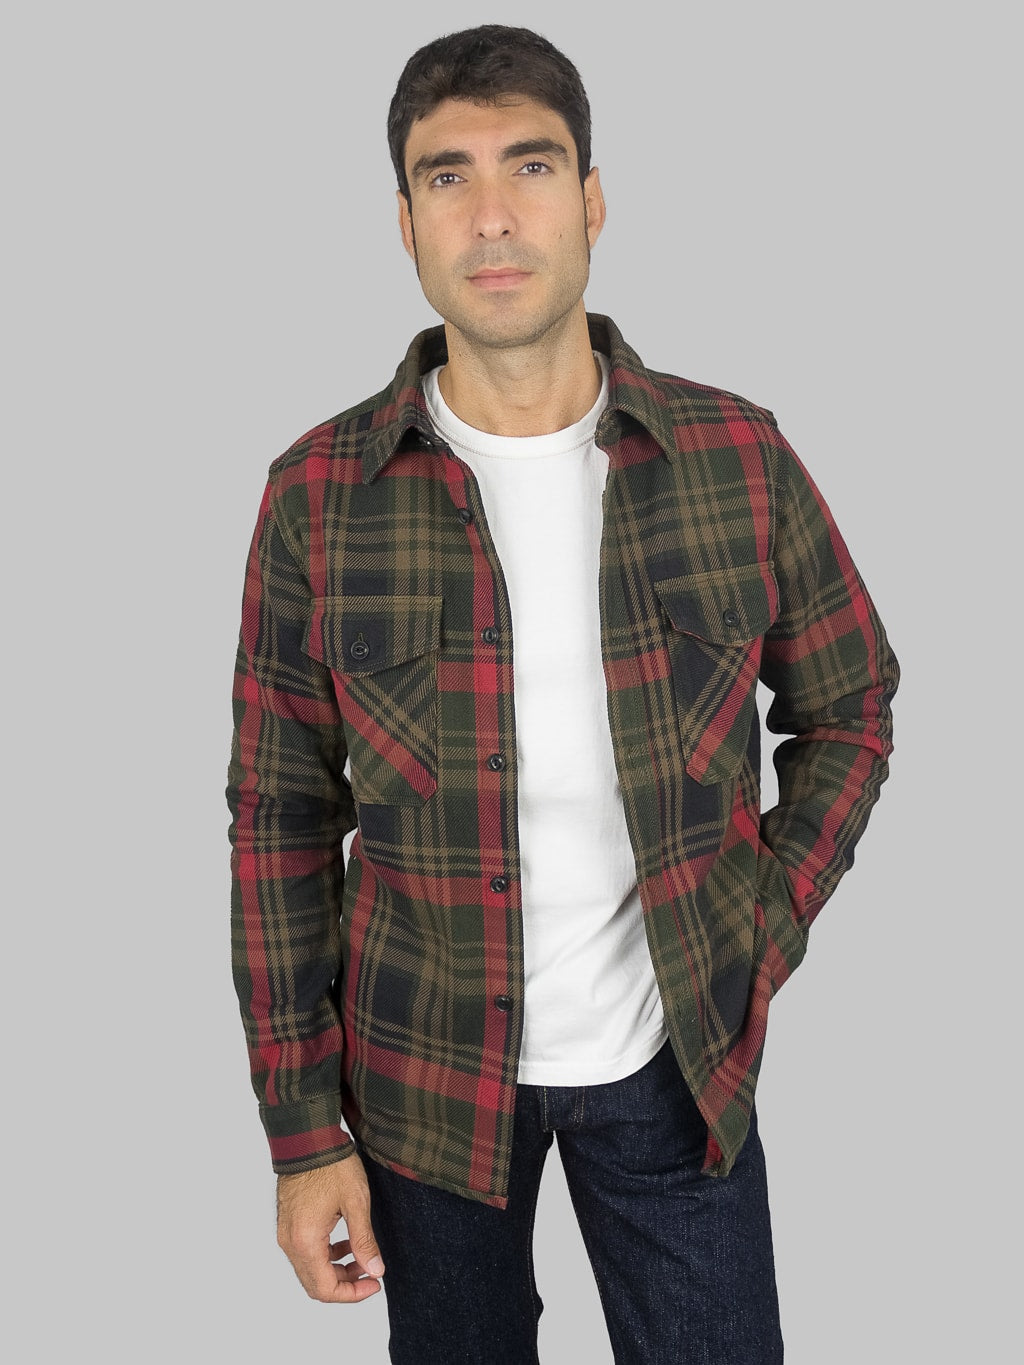 Isaac Pædagogik personlighed UES Extra Heavy Flannel Shirt Red – Redcast Heritage Co.